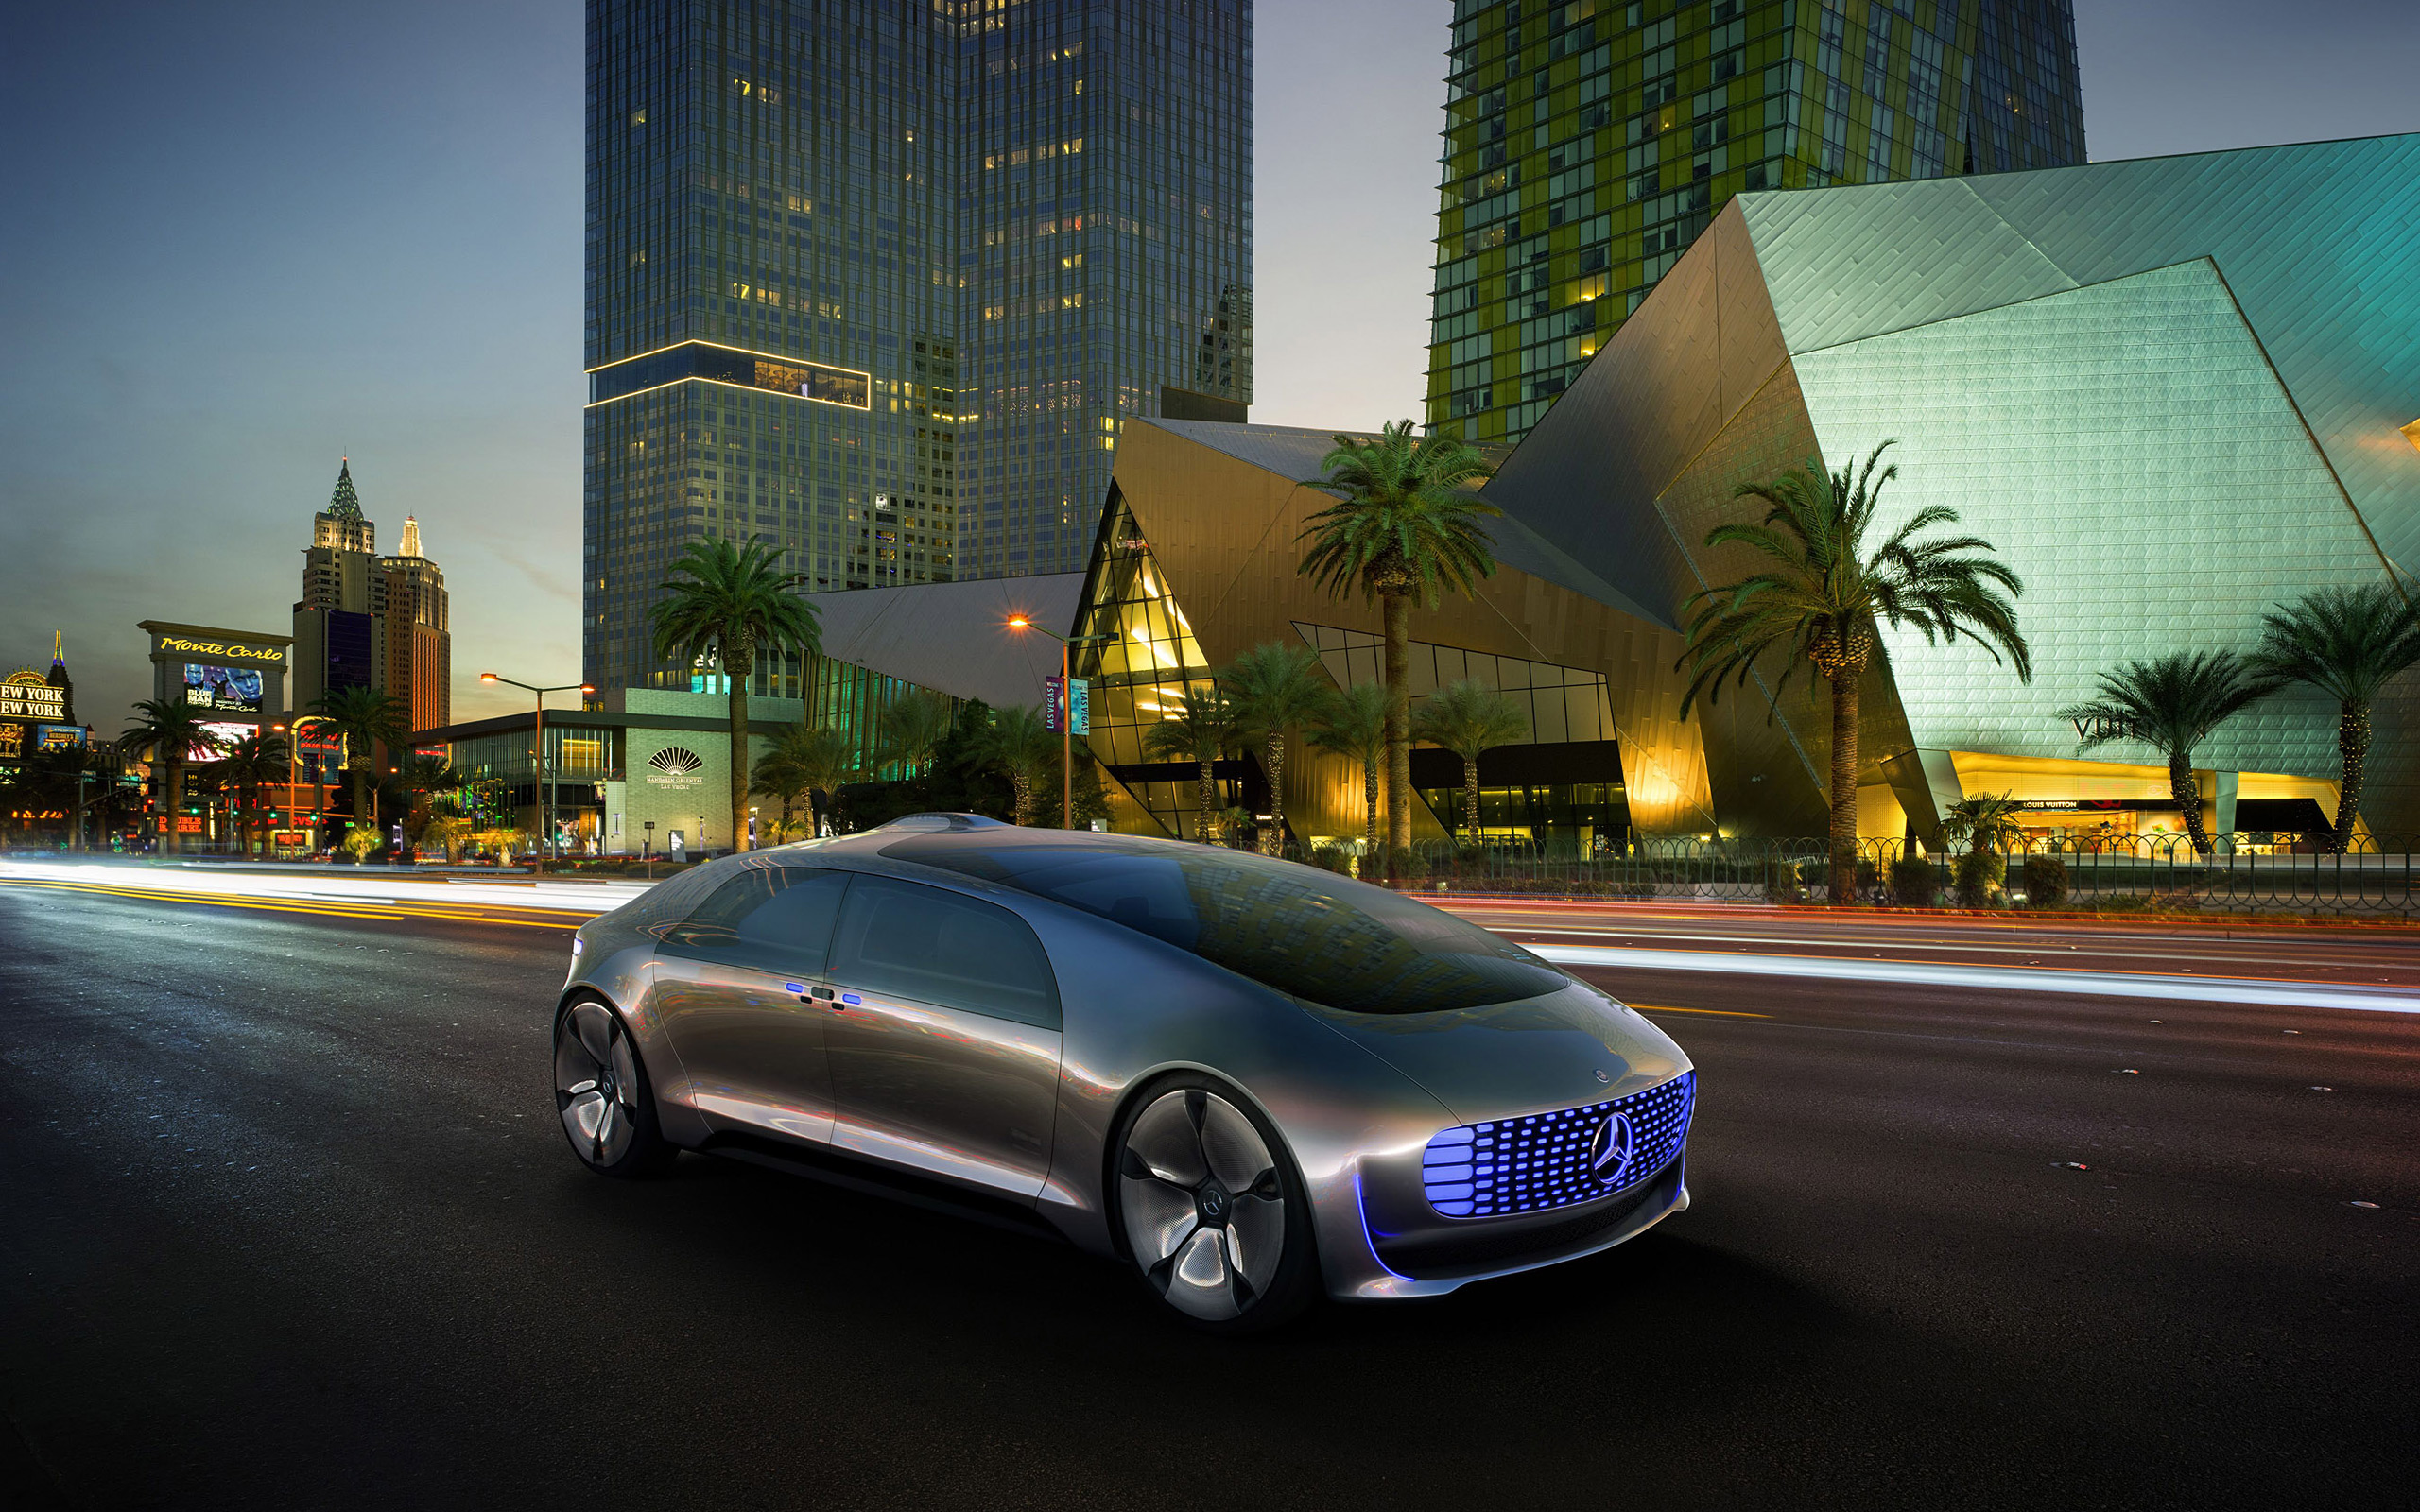  2015 Mercedes-Benz F015 Luxury In Motion Concept Wallpaper.